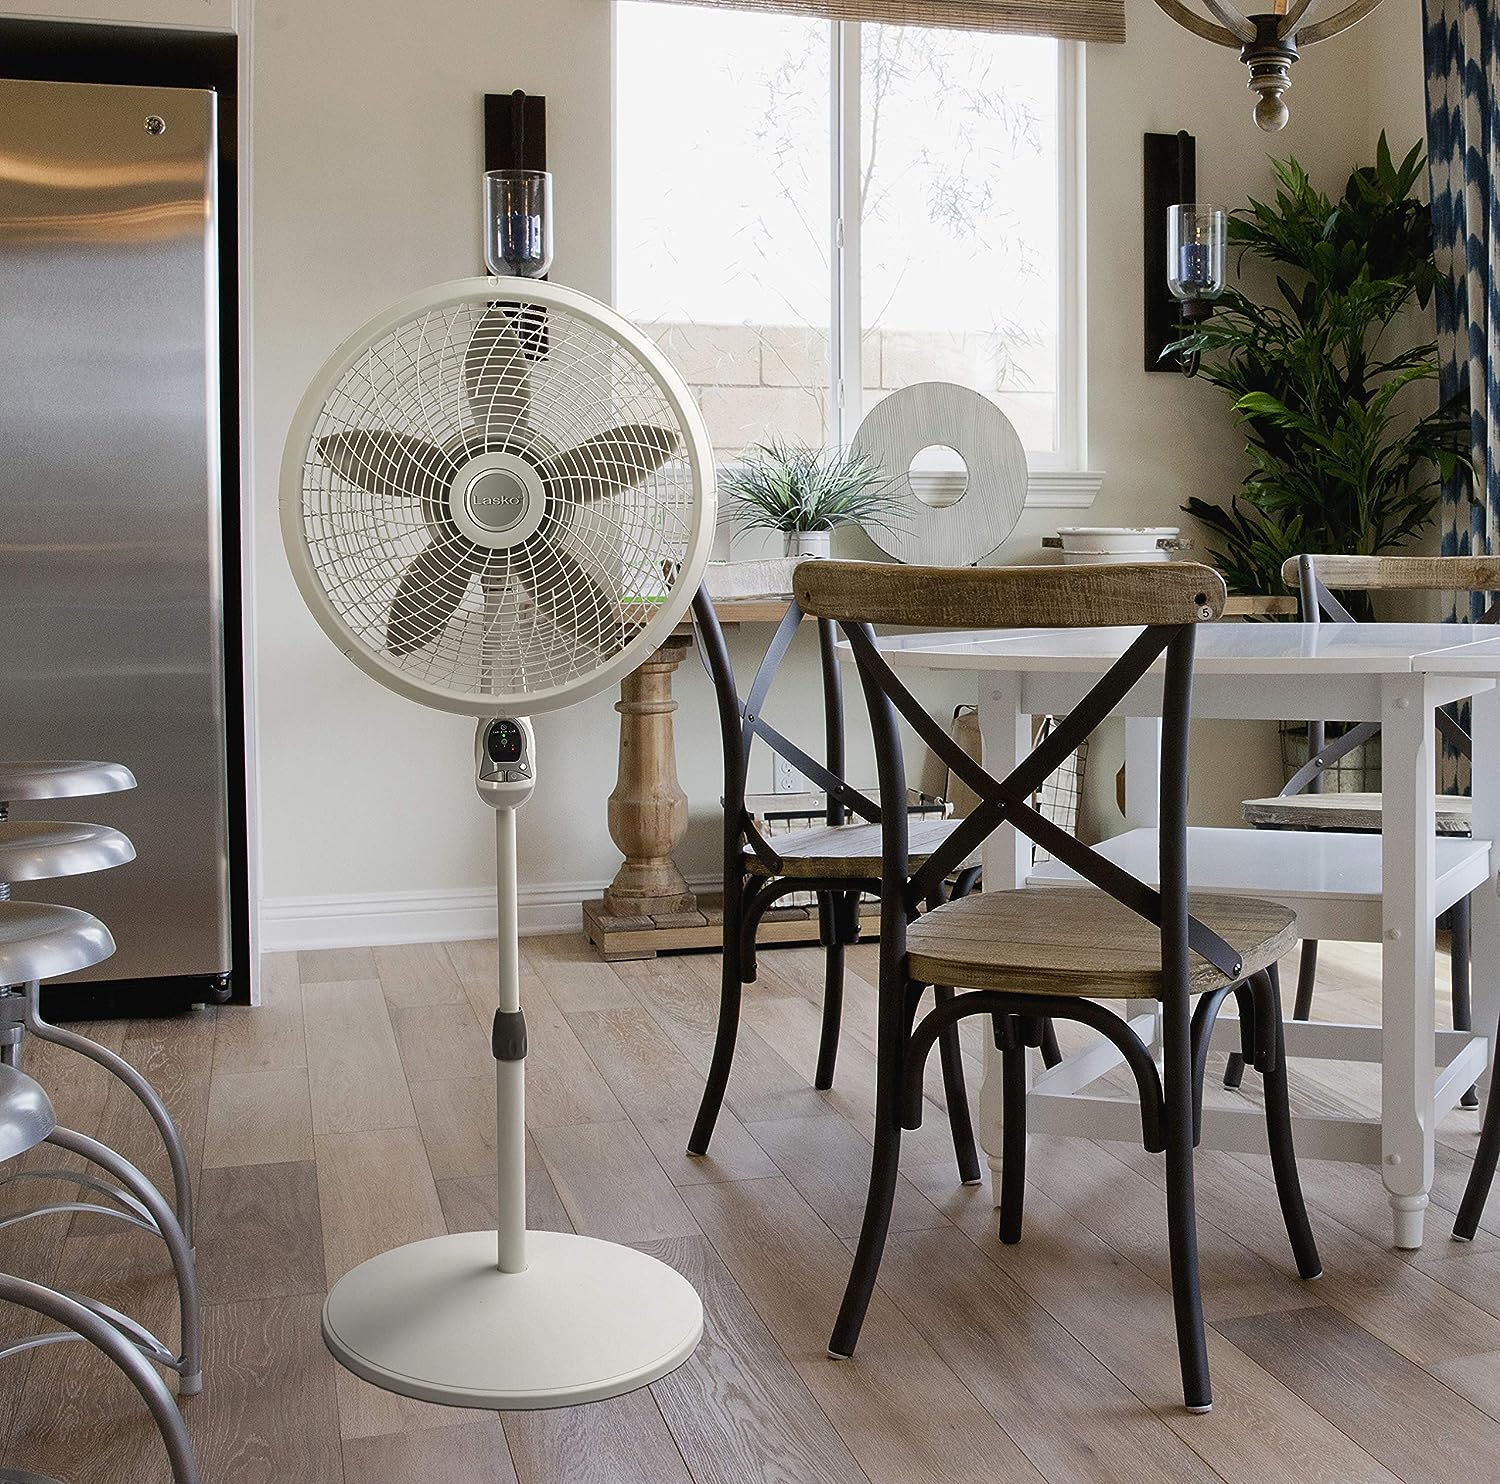 18 Stand Fan with Remote (White)